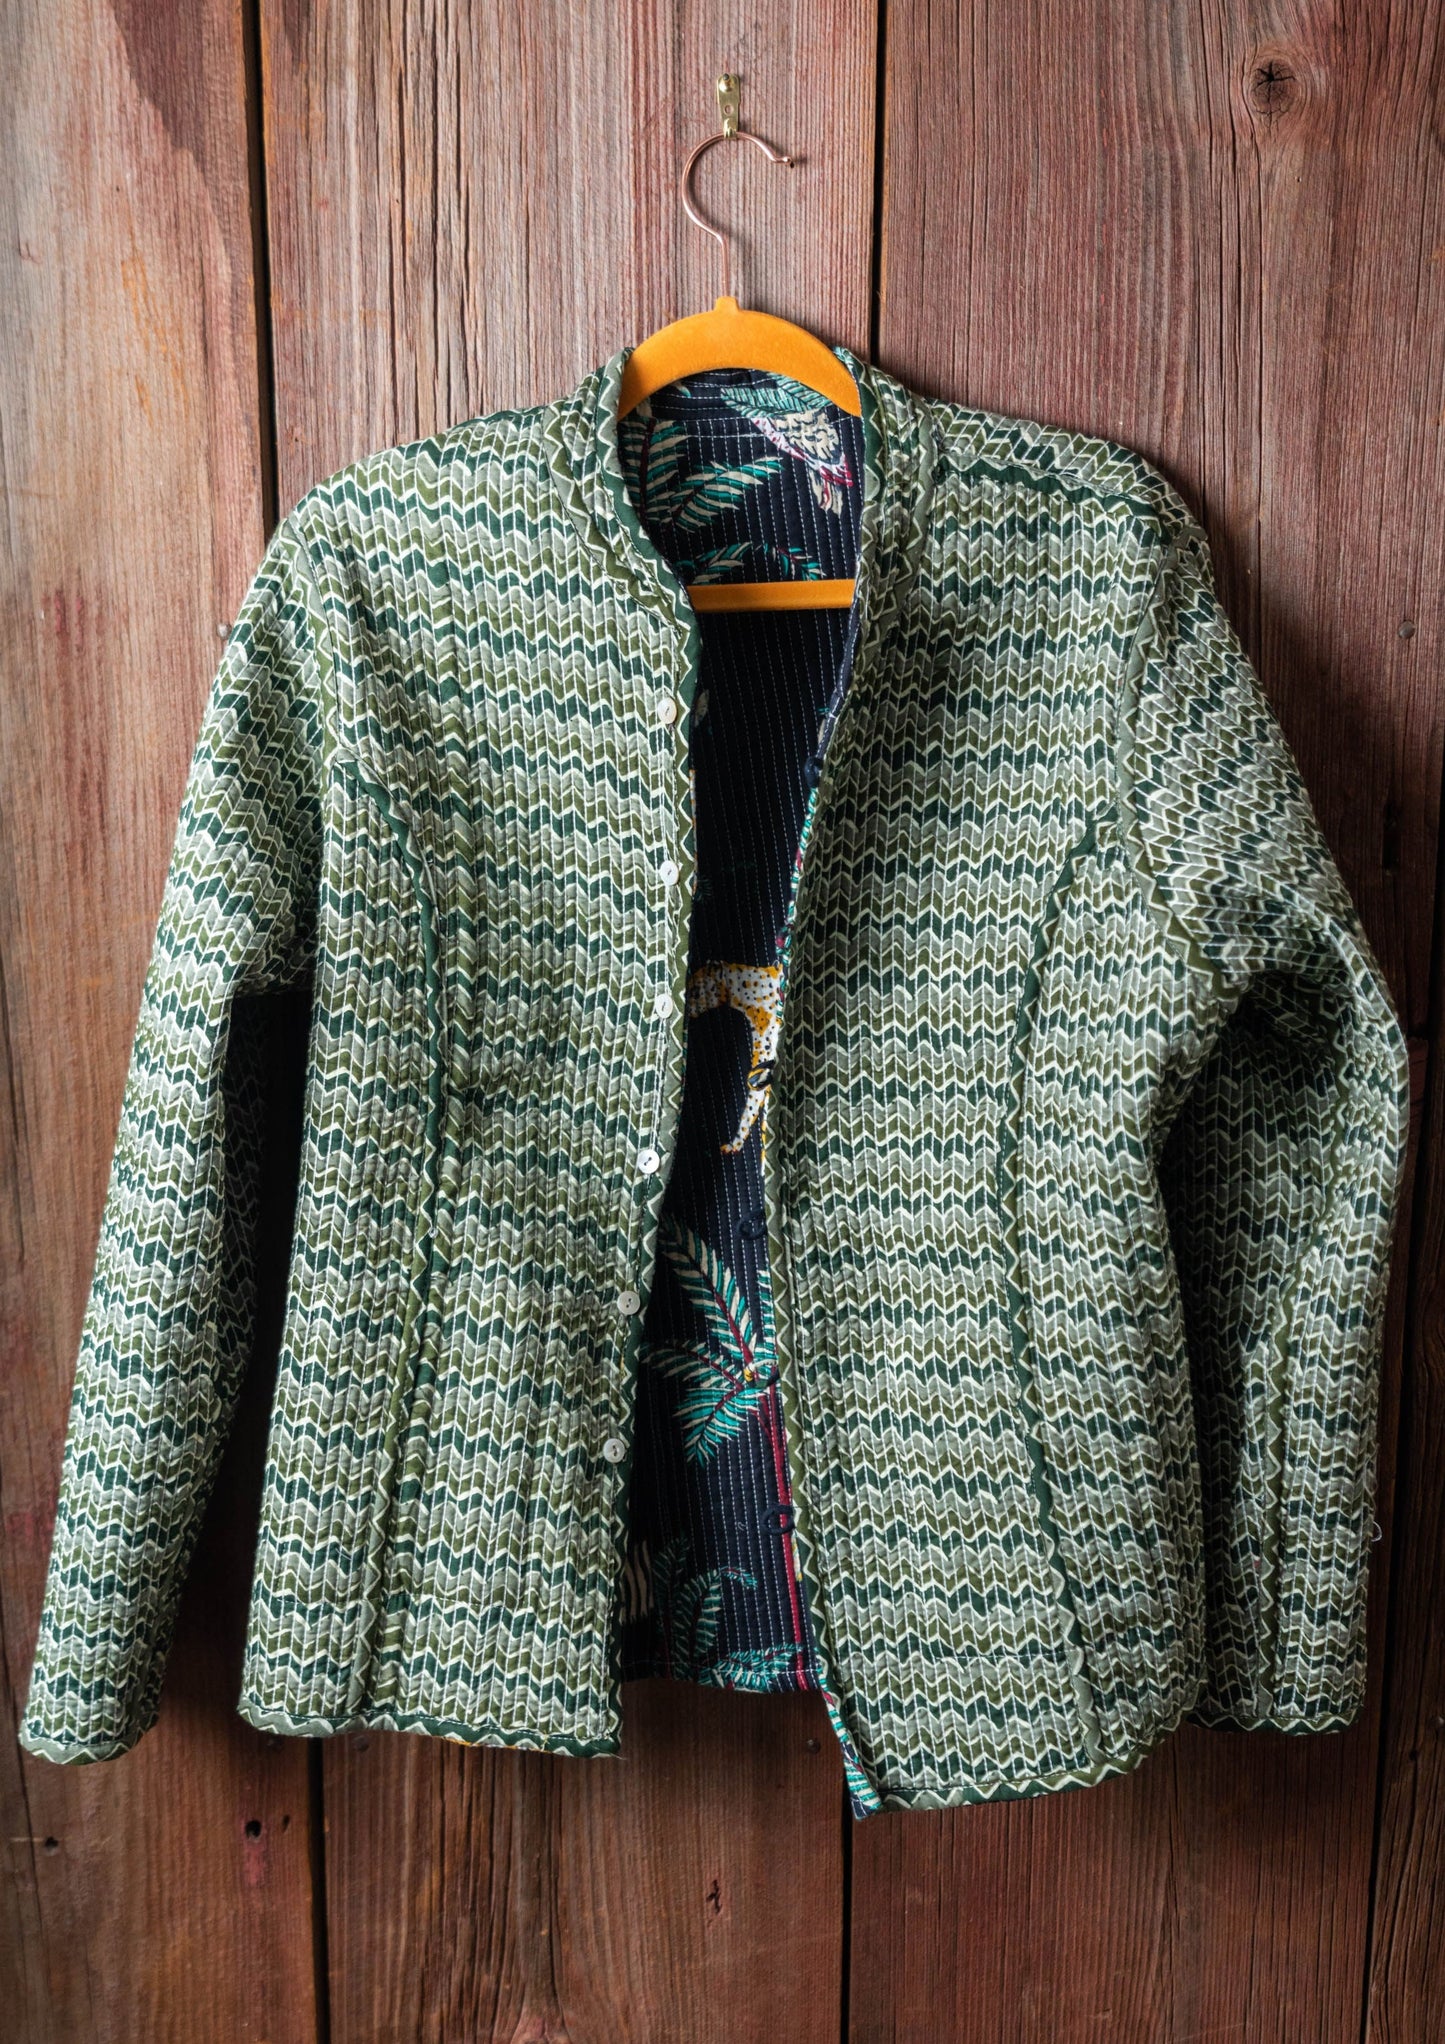 Kantha Quilted Jacket with Jungle Print - DharBazaar